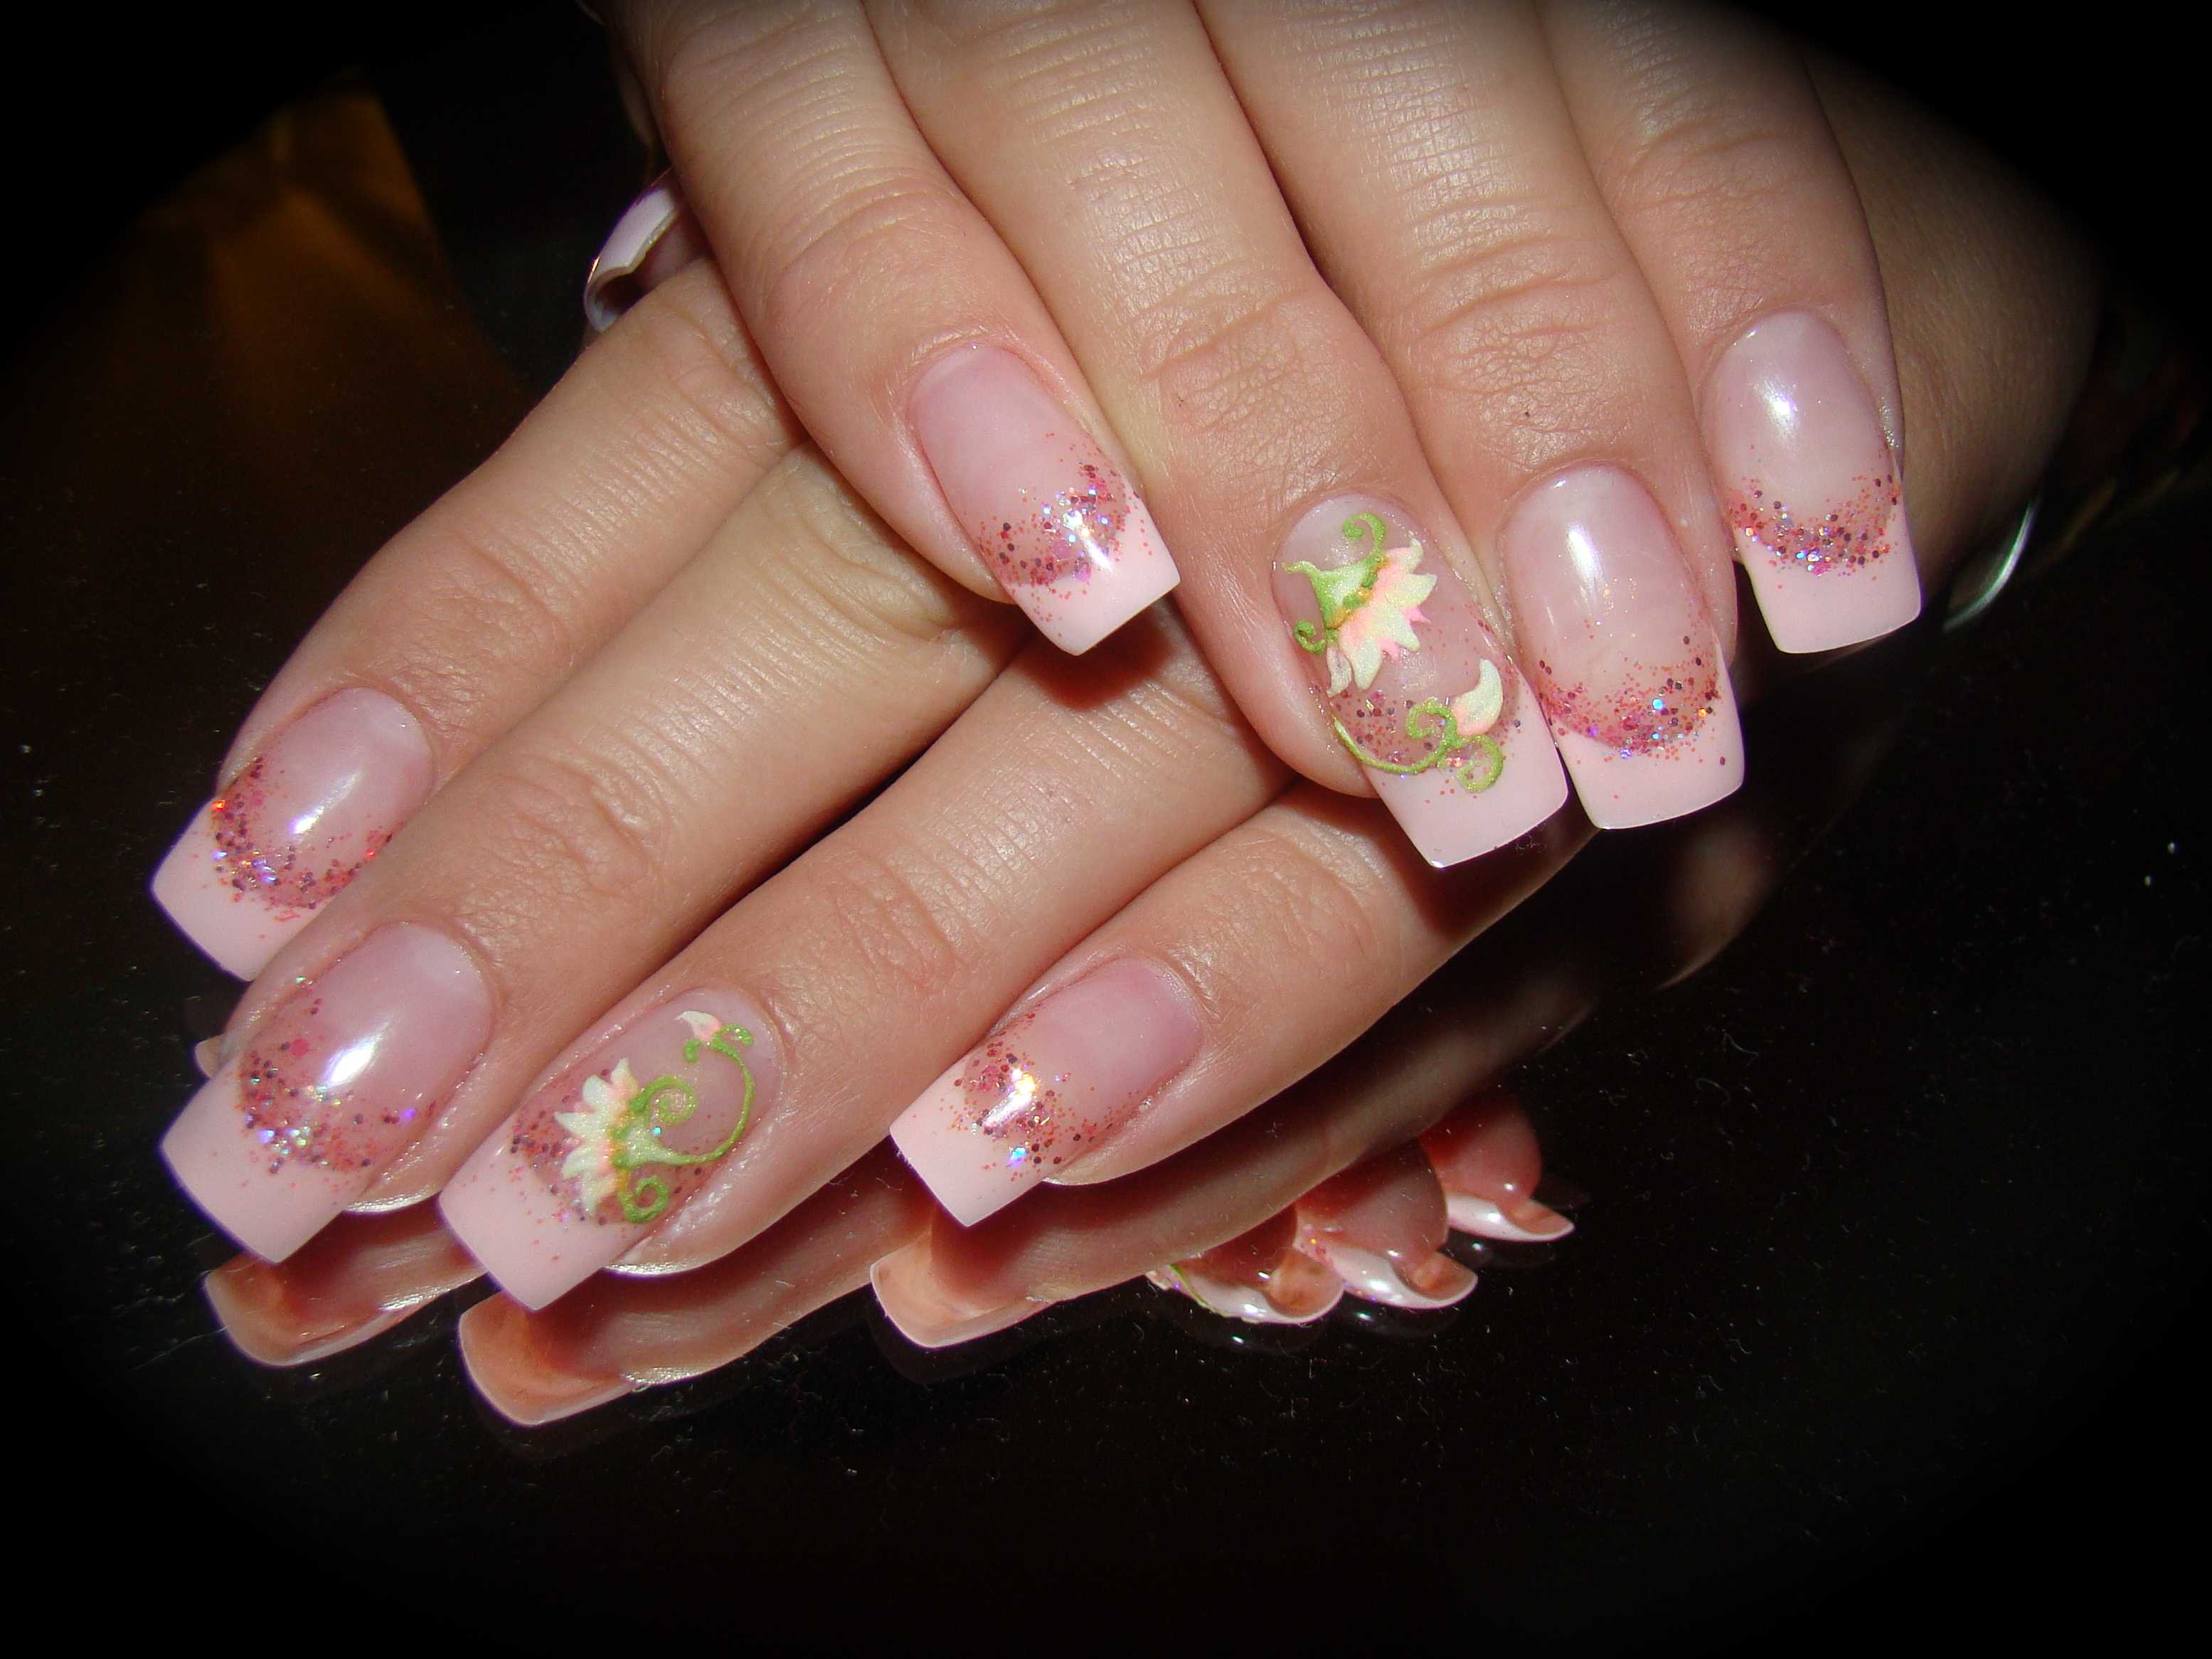 3. Cute Floral Nail Art Ideas for Short Nails - wide 11